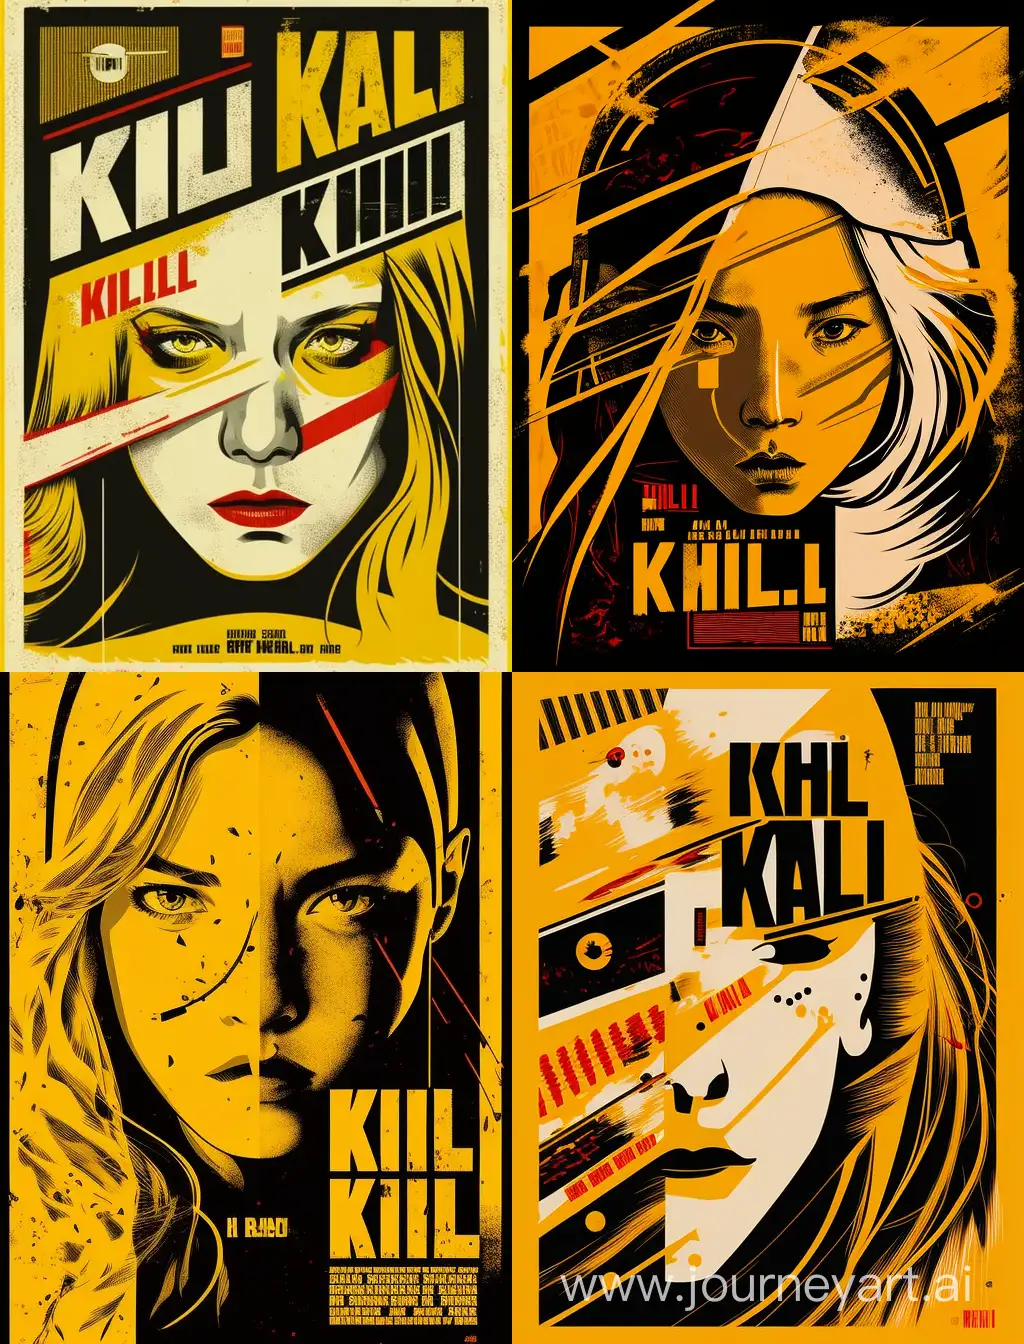 Dynamic-Kill-Bill-Inspired-Poster-with-Vivid-Colors-and-Strong-Composition